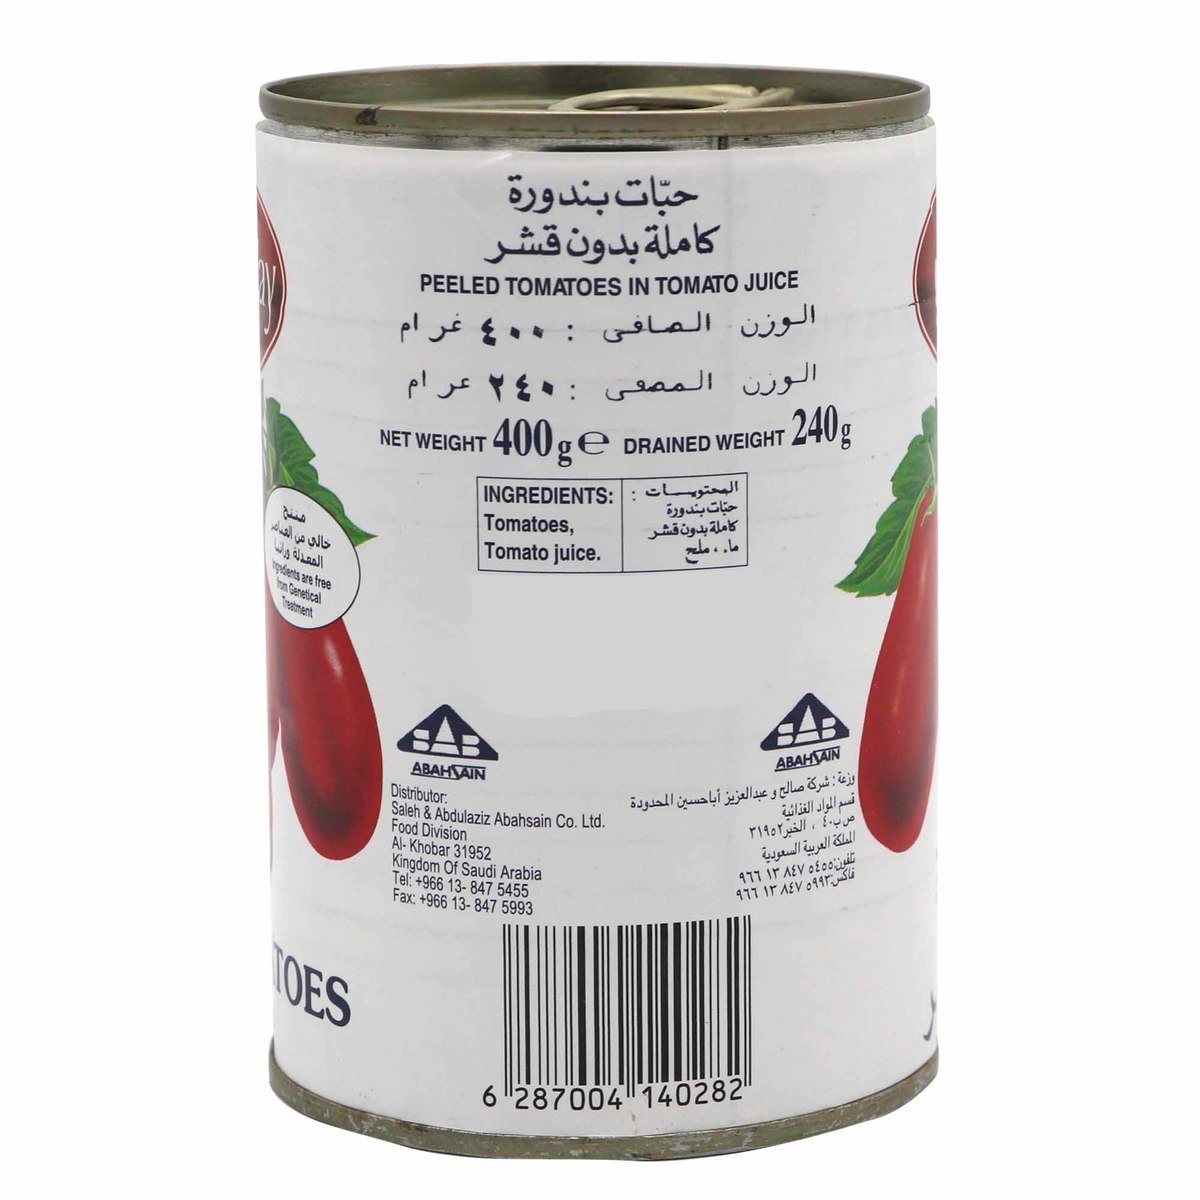 Queens Way Peeled Tomatoes In Tomato Juice 400g